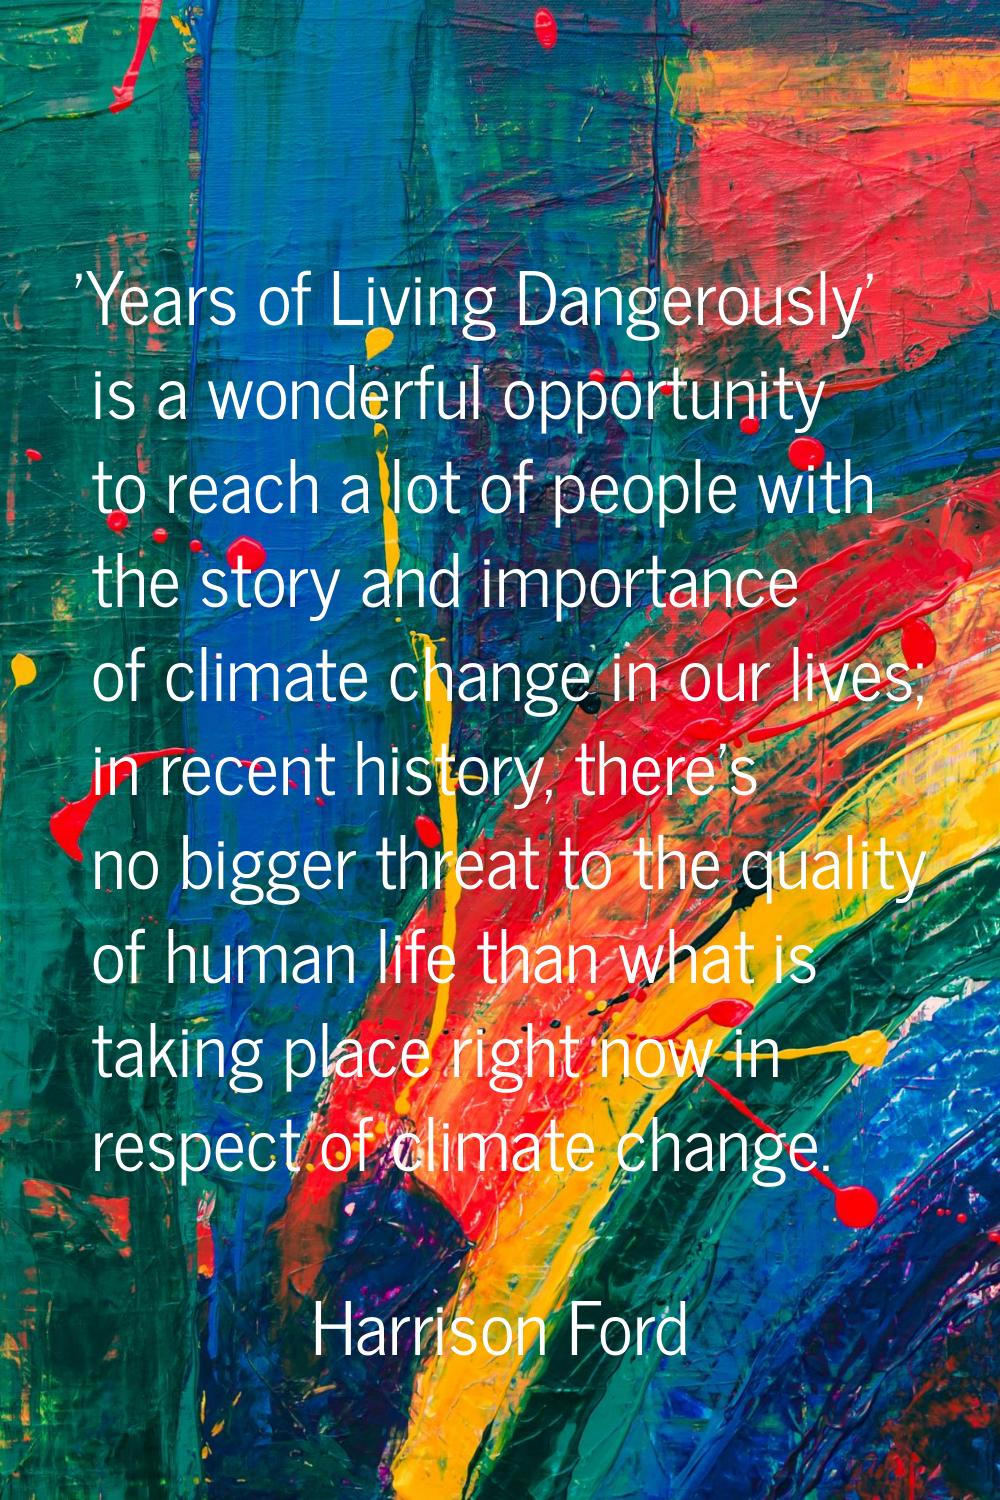 'Years of Living Dangerously' is a wonderful opportunity to reach a lot of people with the story an